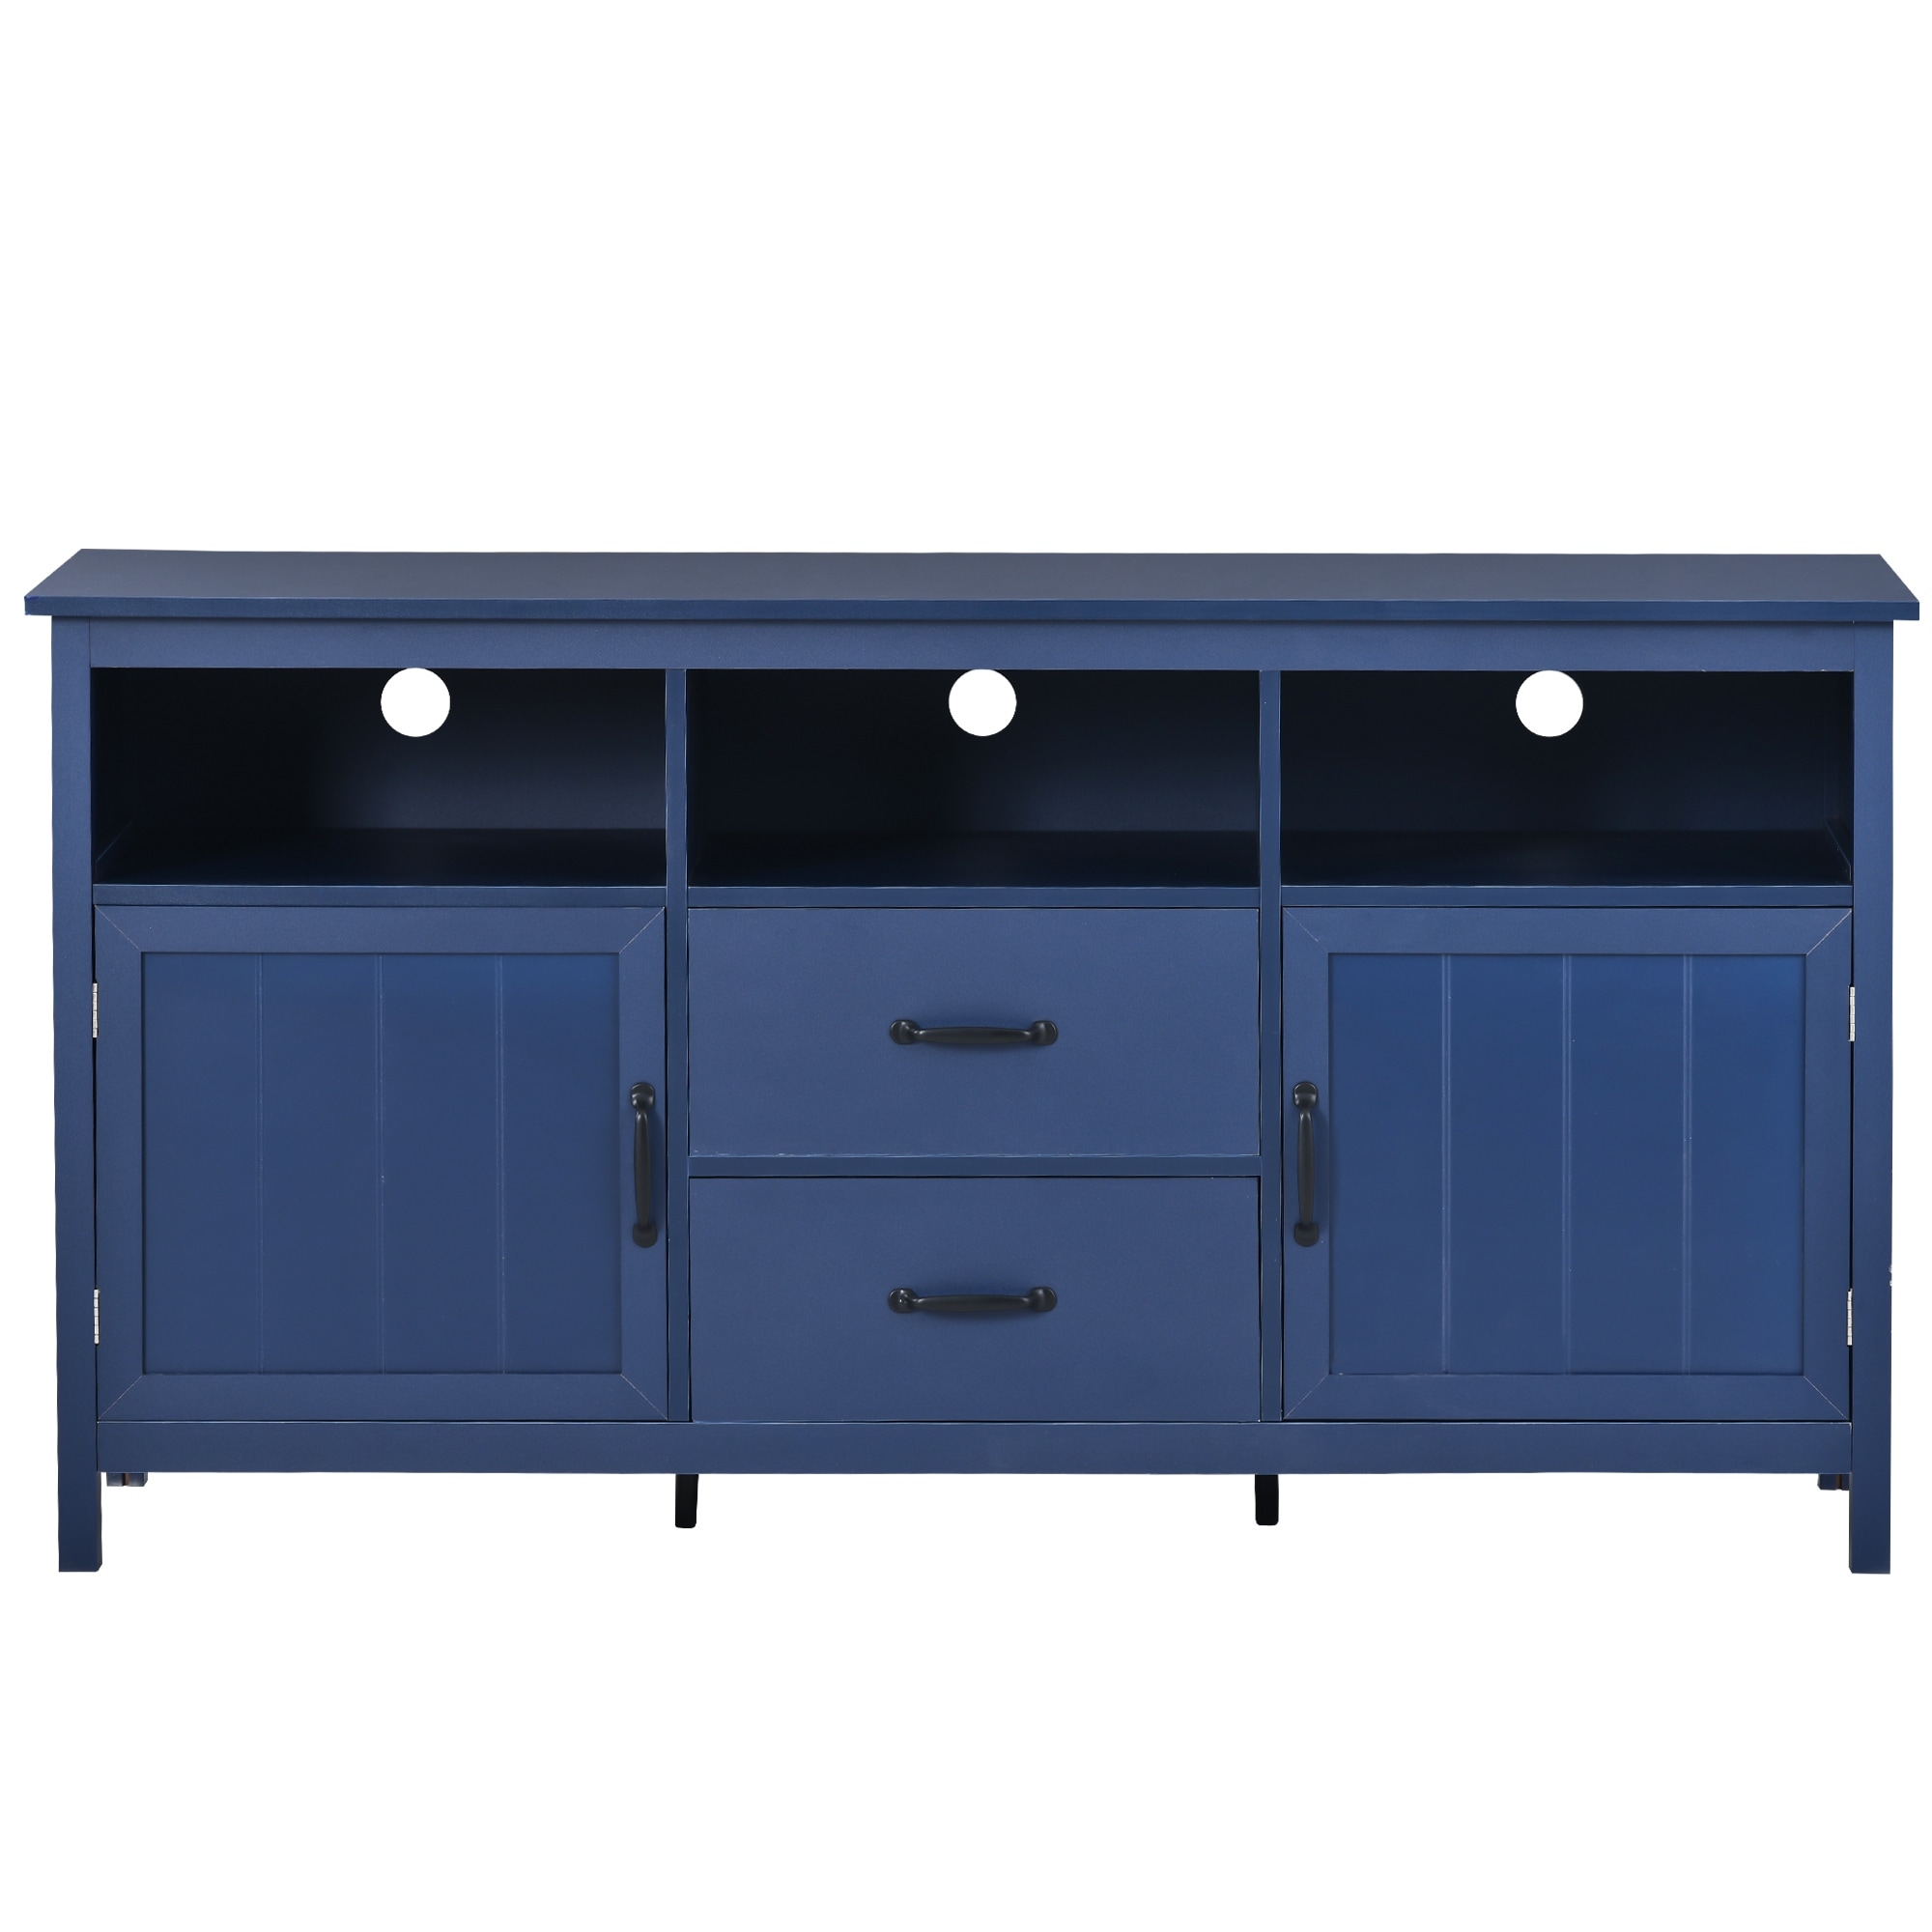 Tv Stand Sideboard Livingroom Open Style Cabinet Media Cabinet  Navy - 18 Inches In Width